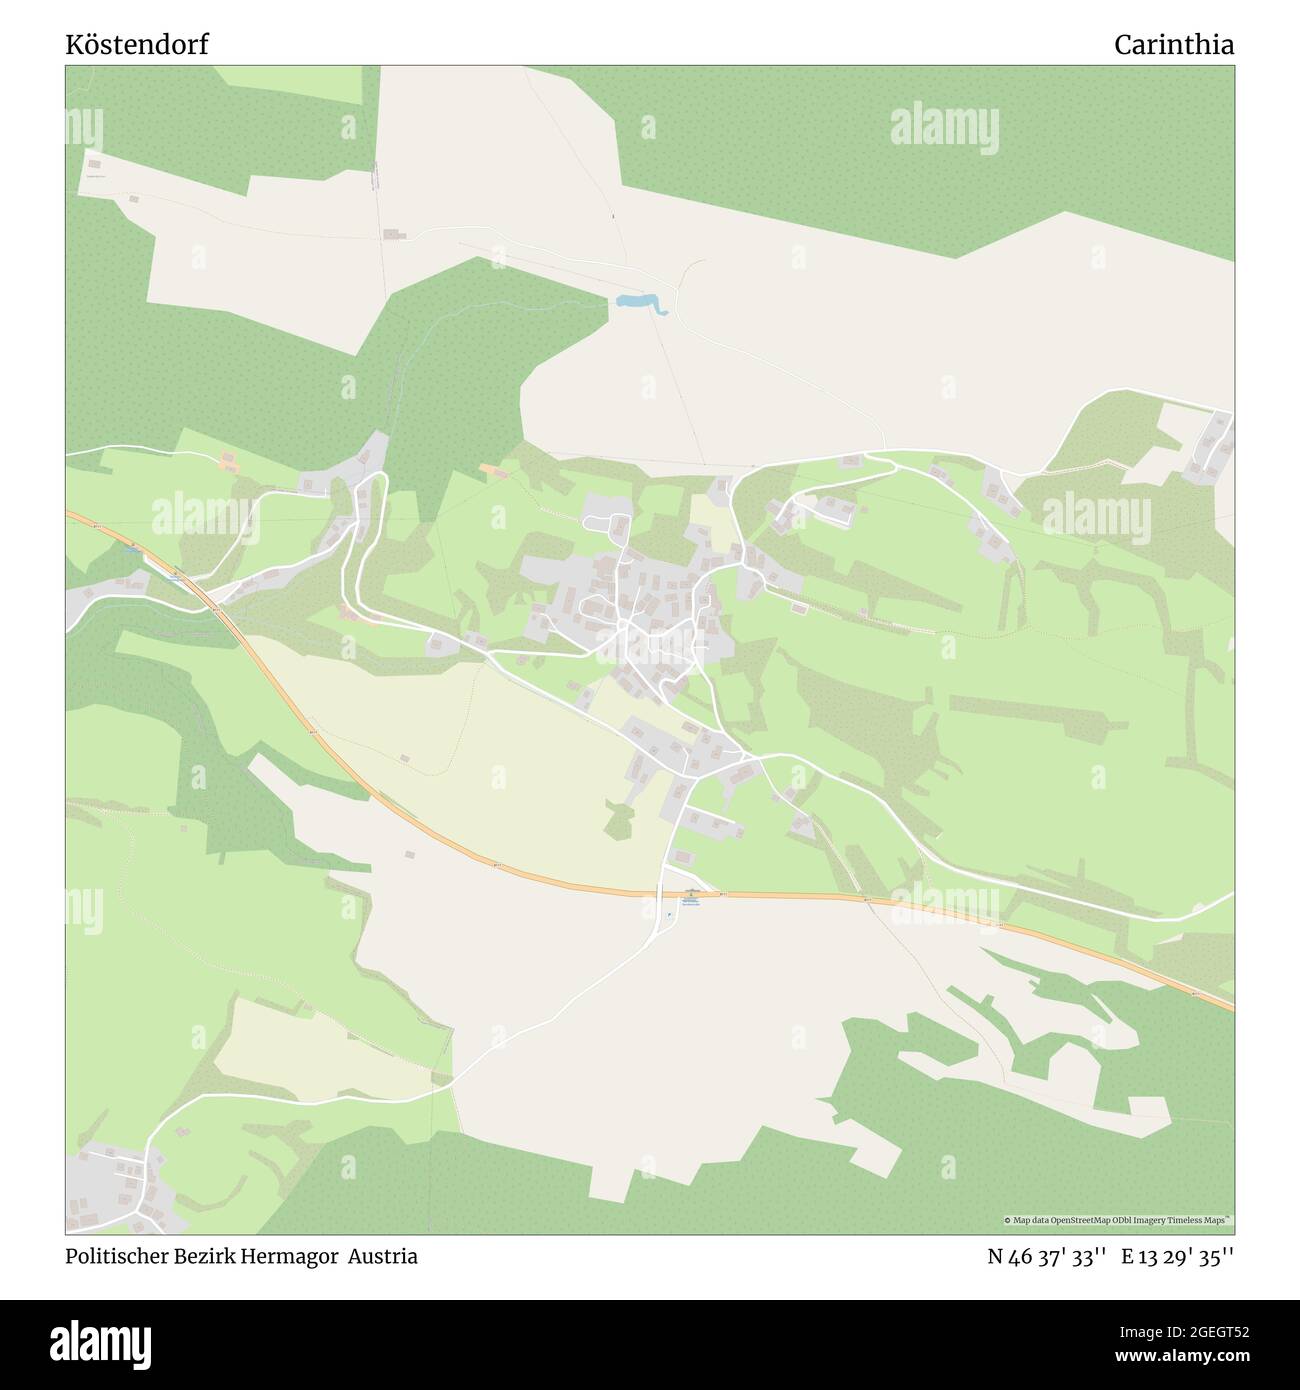 Köstendorf, Politischer Bezirk Hermagor, Austria, Carinthia, N 46 37' 33'', E 13 29' 35'', map, Timeless Map published in 2021. Travelers, explorers and adventurers like Florence Nightingale, David Livingstone, Ernest Shackleton, Lewis and Clark and Sherlock Holmes relied on maps to plan travels to the world's most remote corners, Timeless Maps is mapping most locations on the globe, showing the achievement of great dreams Stock Photo